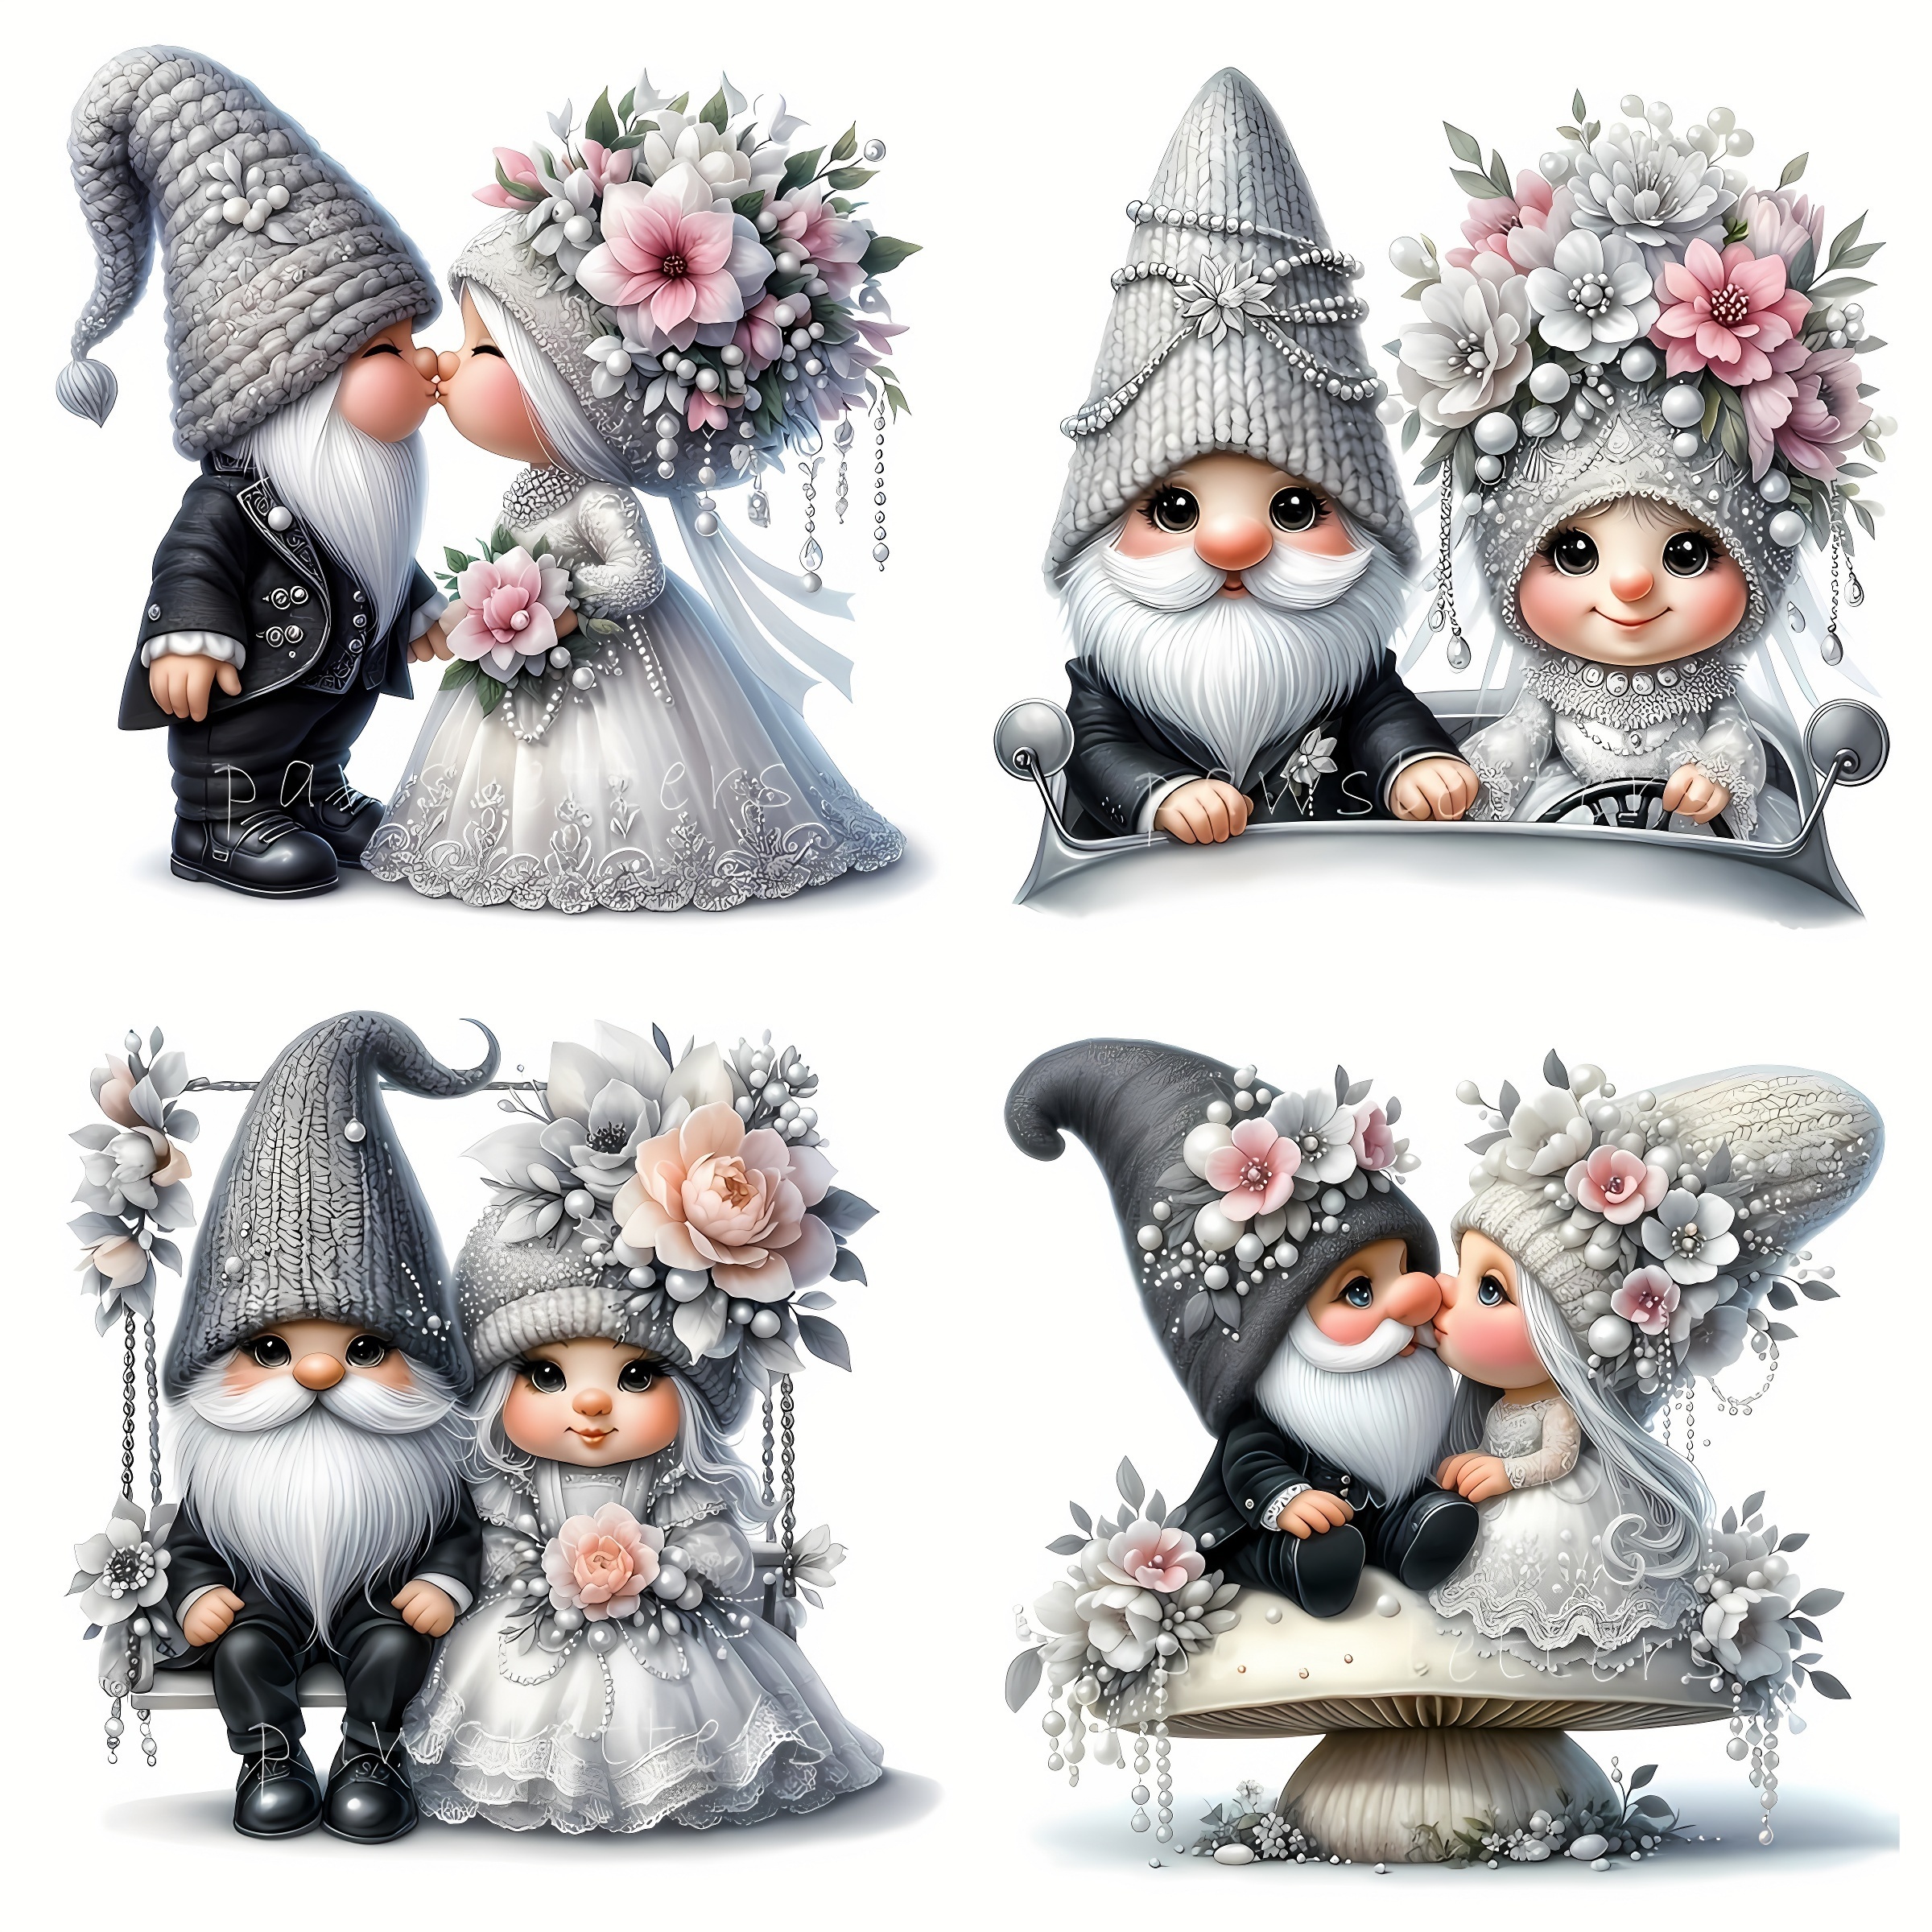 

Love-themed Wedding Gnome 5d Diy Diamond Painting Kit For Adults - Round Full Drill Acrylic Gemstone Art, Beginner Friendly Craft Tool & Supplies For Home Wall Decor